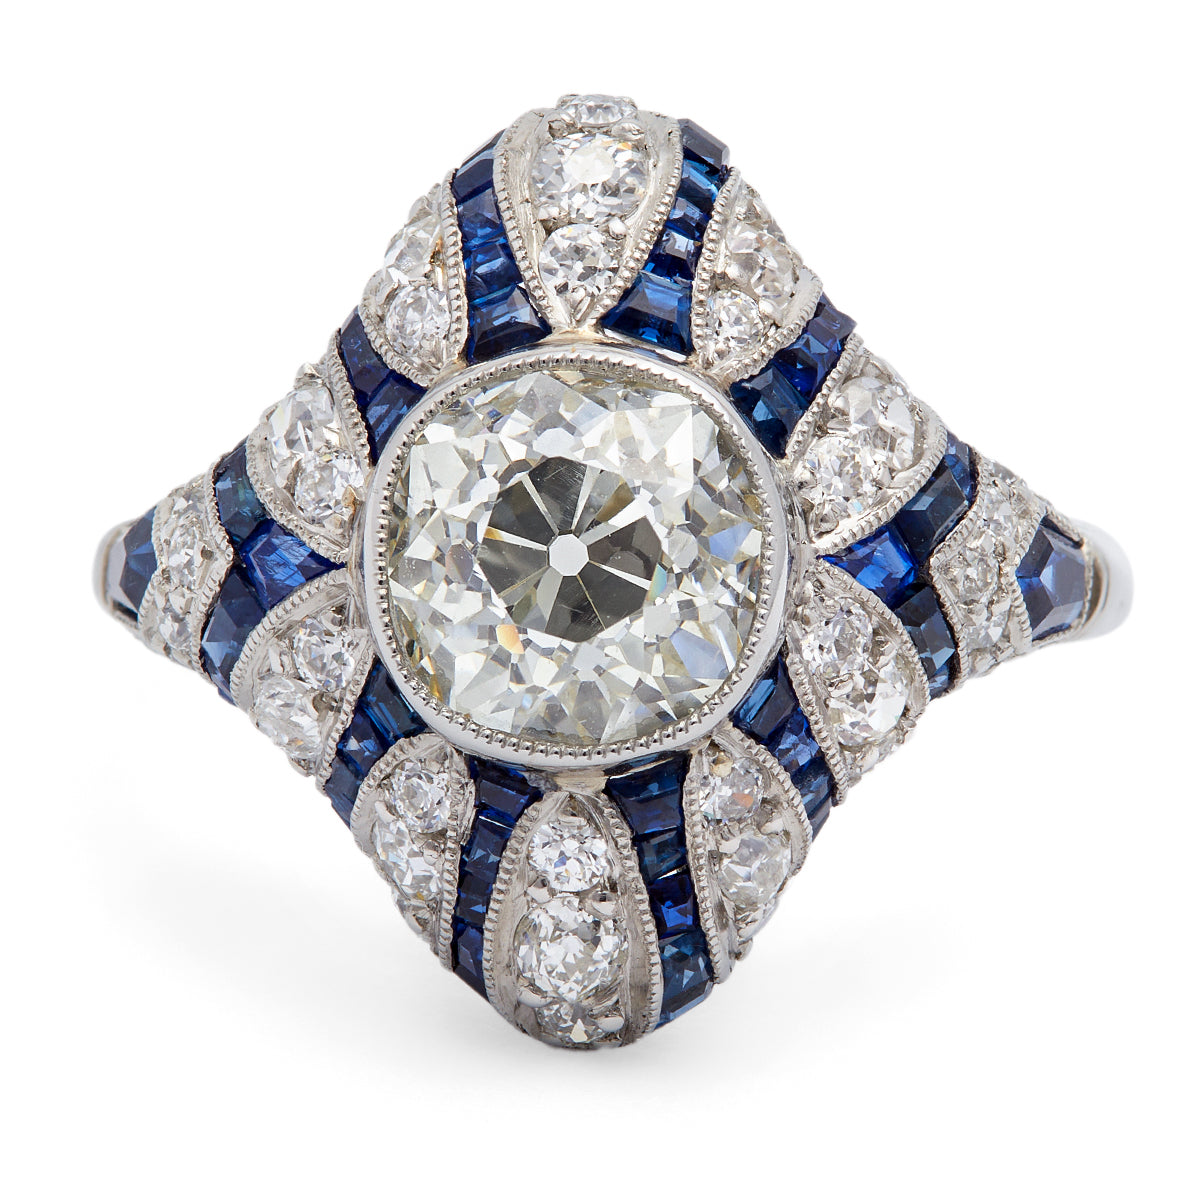 Art Deco Inspired 1.86 Diamond and Sapphire Platinum Ring Rings Jack Weir & Sons   